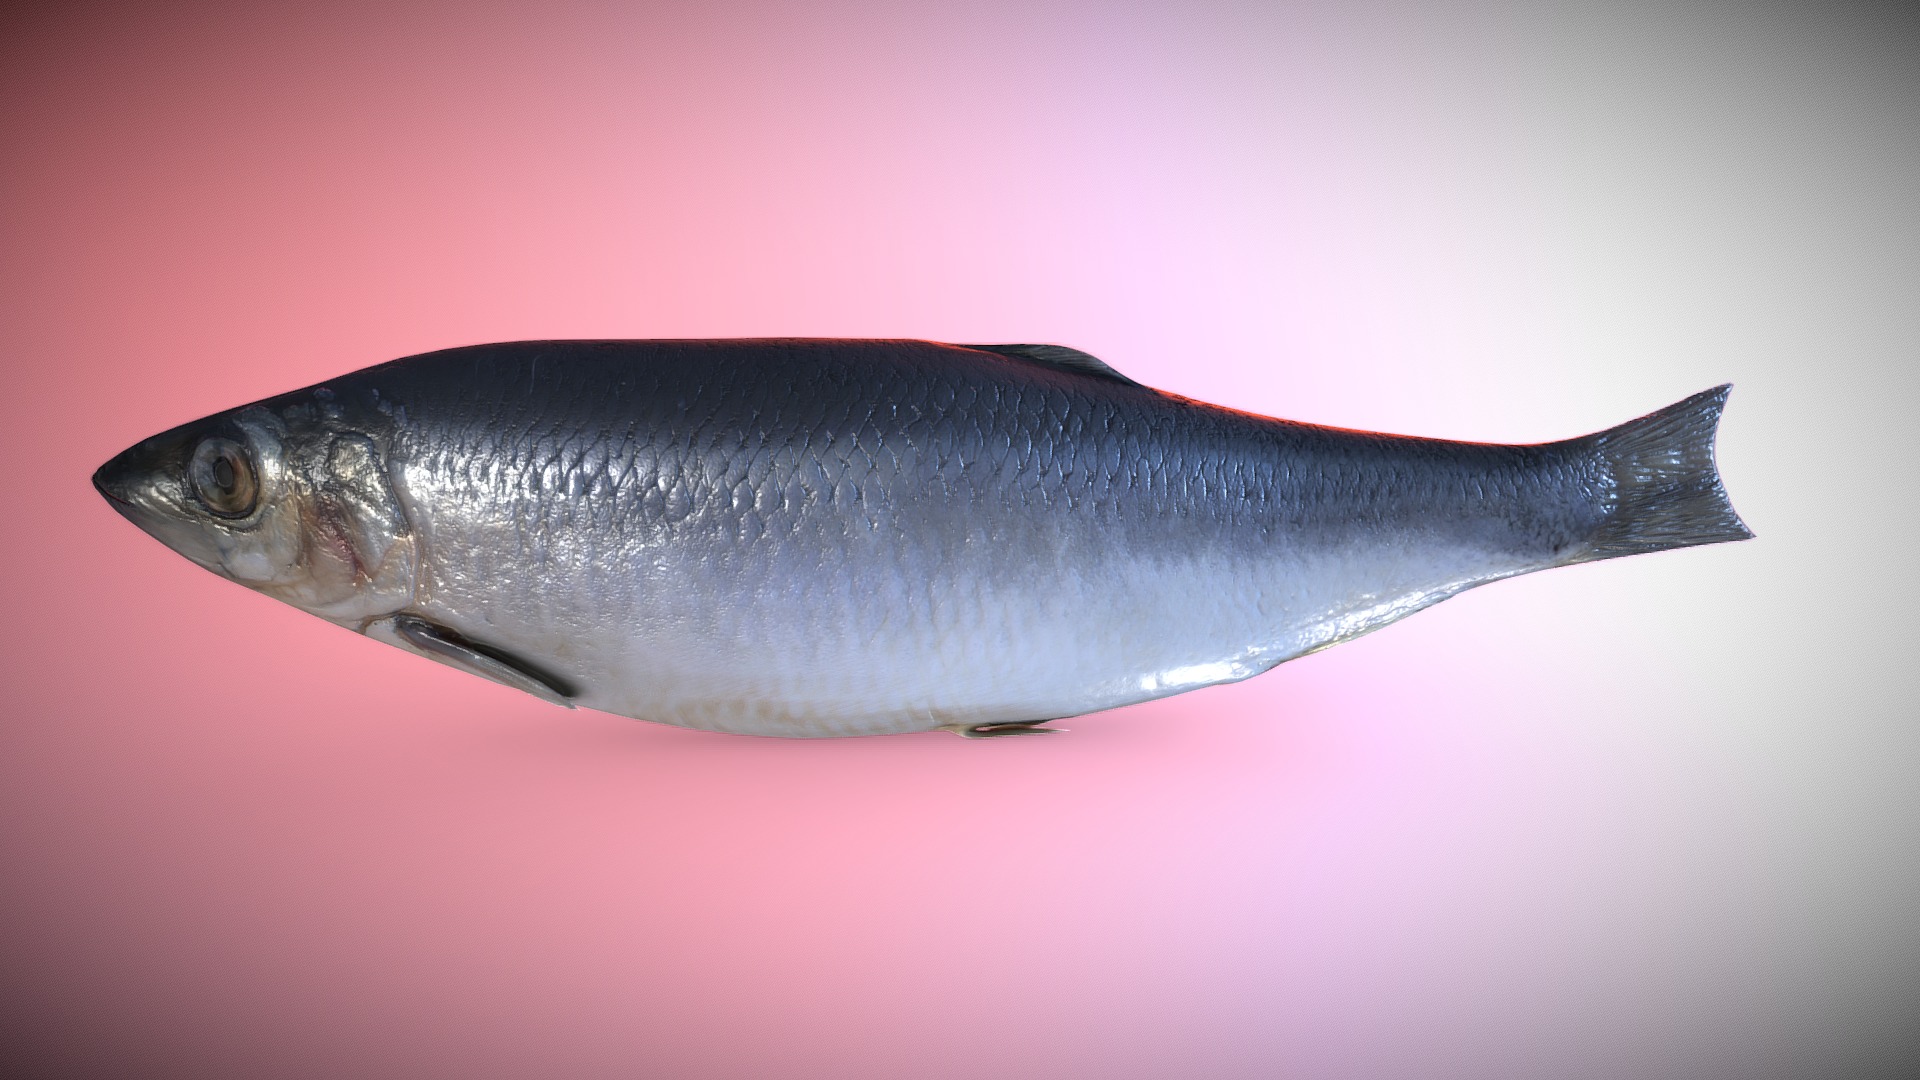 3D model Smiley Dead Fish - This is a 3D model of the Smiley Dead Fish. The 3D model is about a fish on a pink surface.